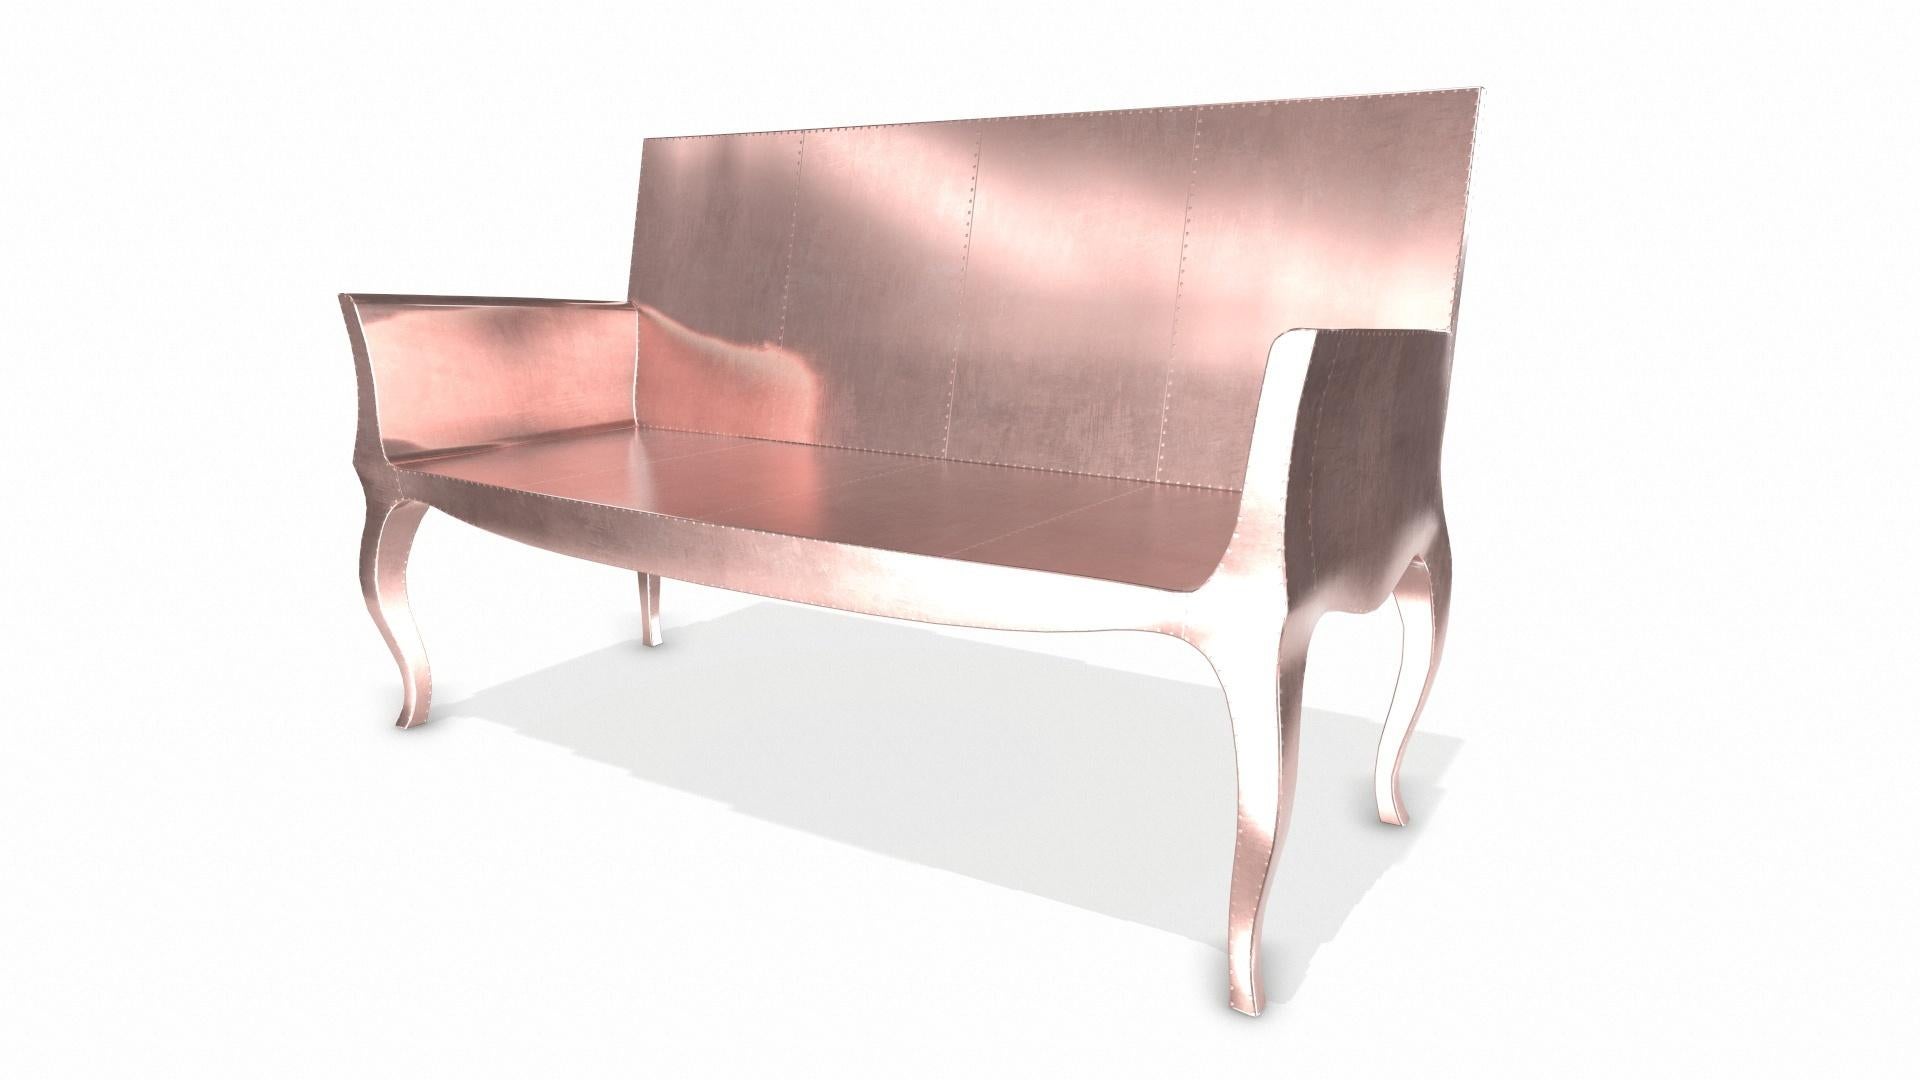 American Louise Settee Art Deco Settees in Smooth Copper by Paul Mathieu for S Odegard For Sale